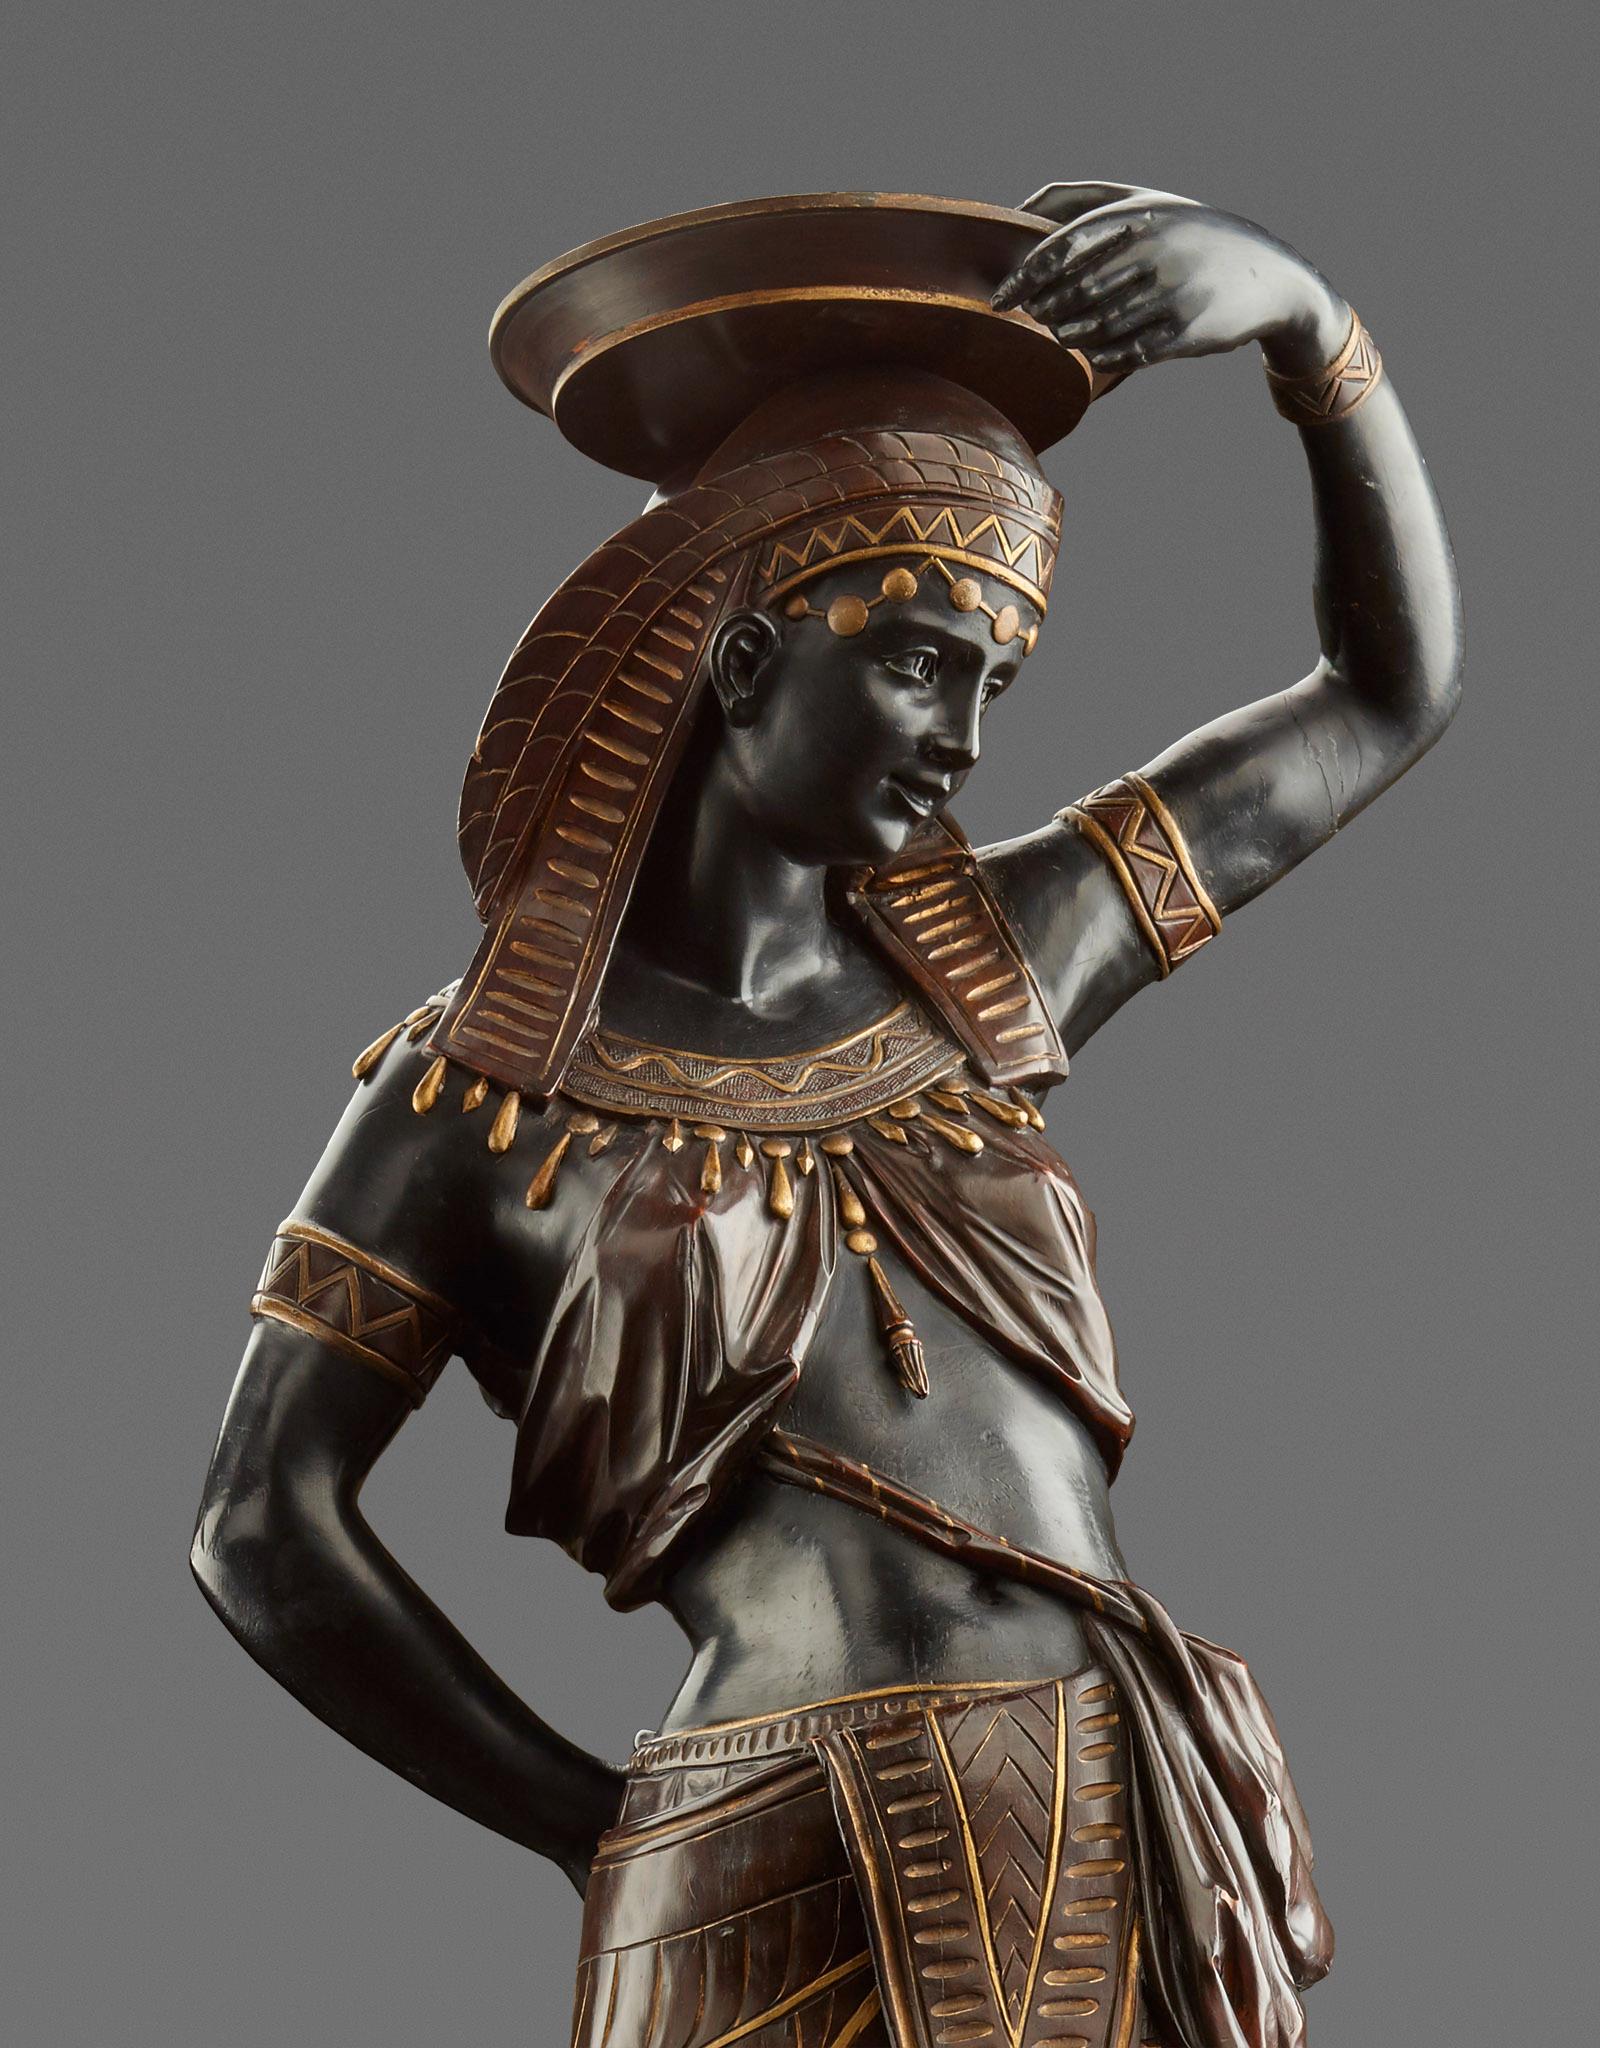 Venice, c. 1865
Wood, carved and set, partially gilded. On a pedestal decorated with lancet leaves and a surrounding animal frieze with four kneeling servants, the impressive figure of a graceful, richly decorated Egyptian dancer, carrying a bowl